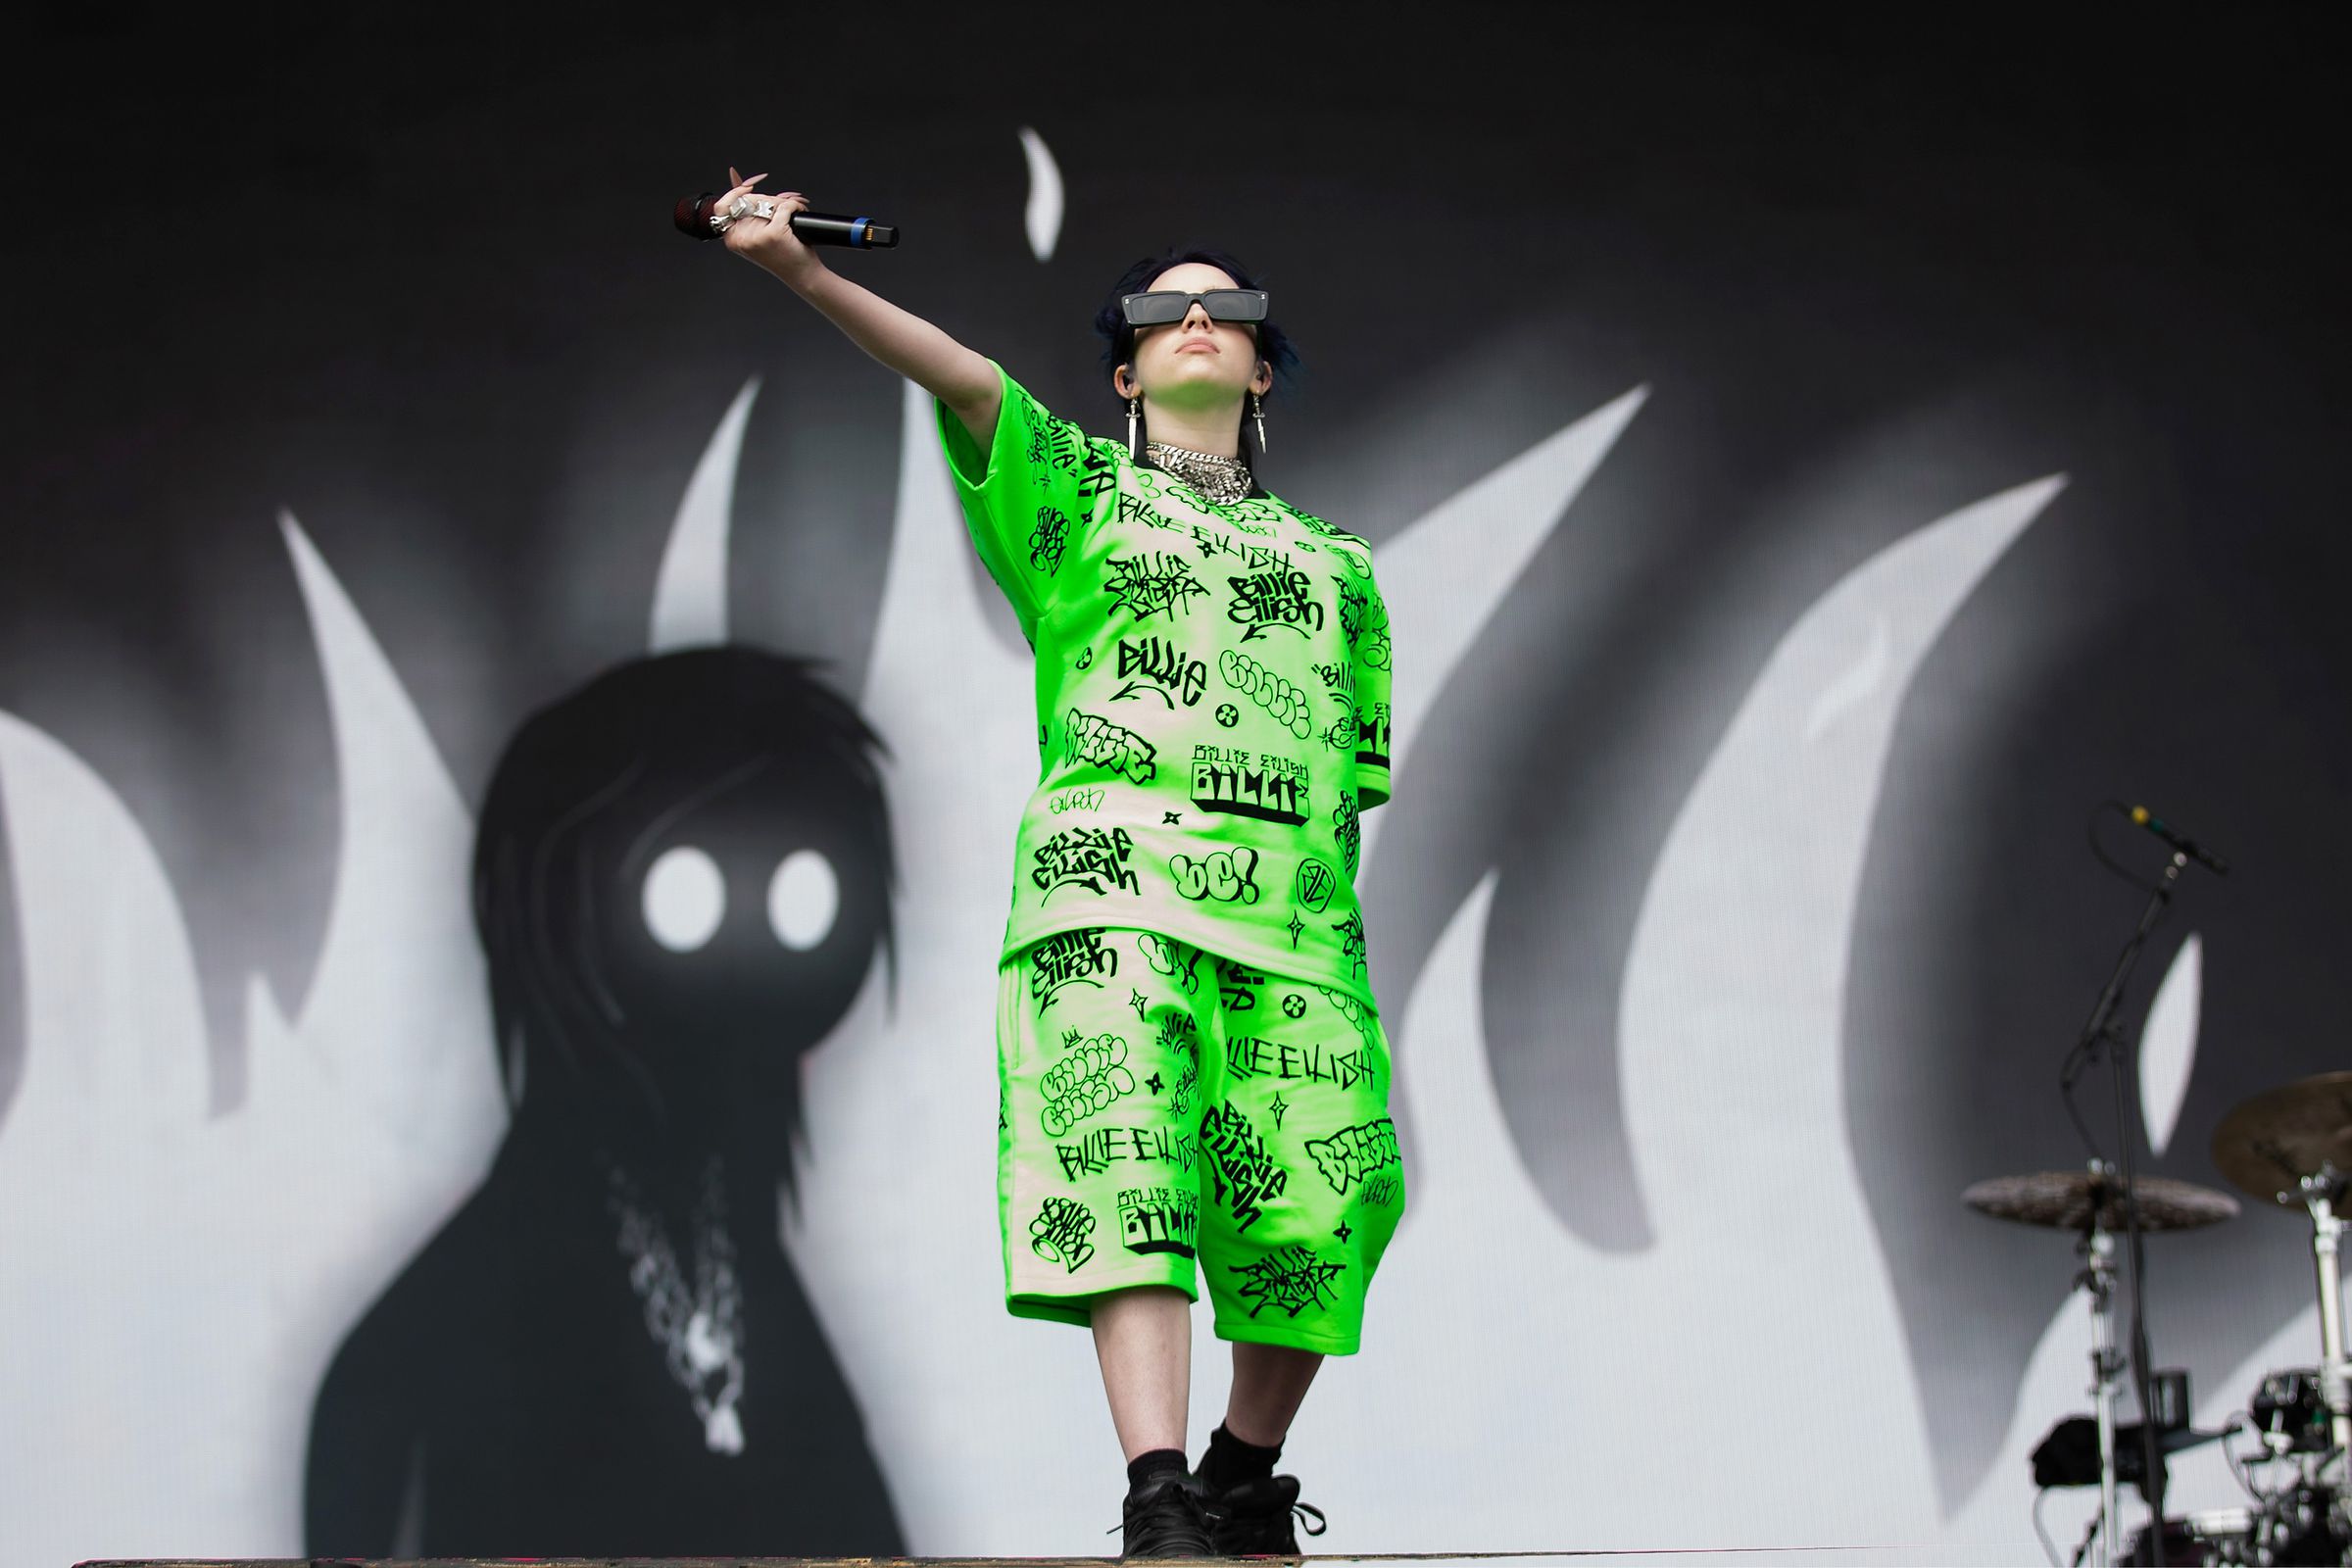 Billie Eilish stands onstage in front of a backdrop of greyscale flames and a white-eyed shillouette, holding a microphone outstretched towards the crowd